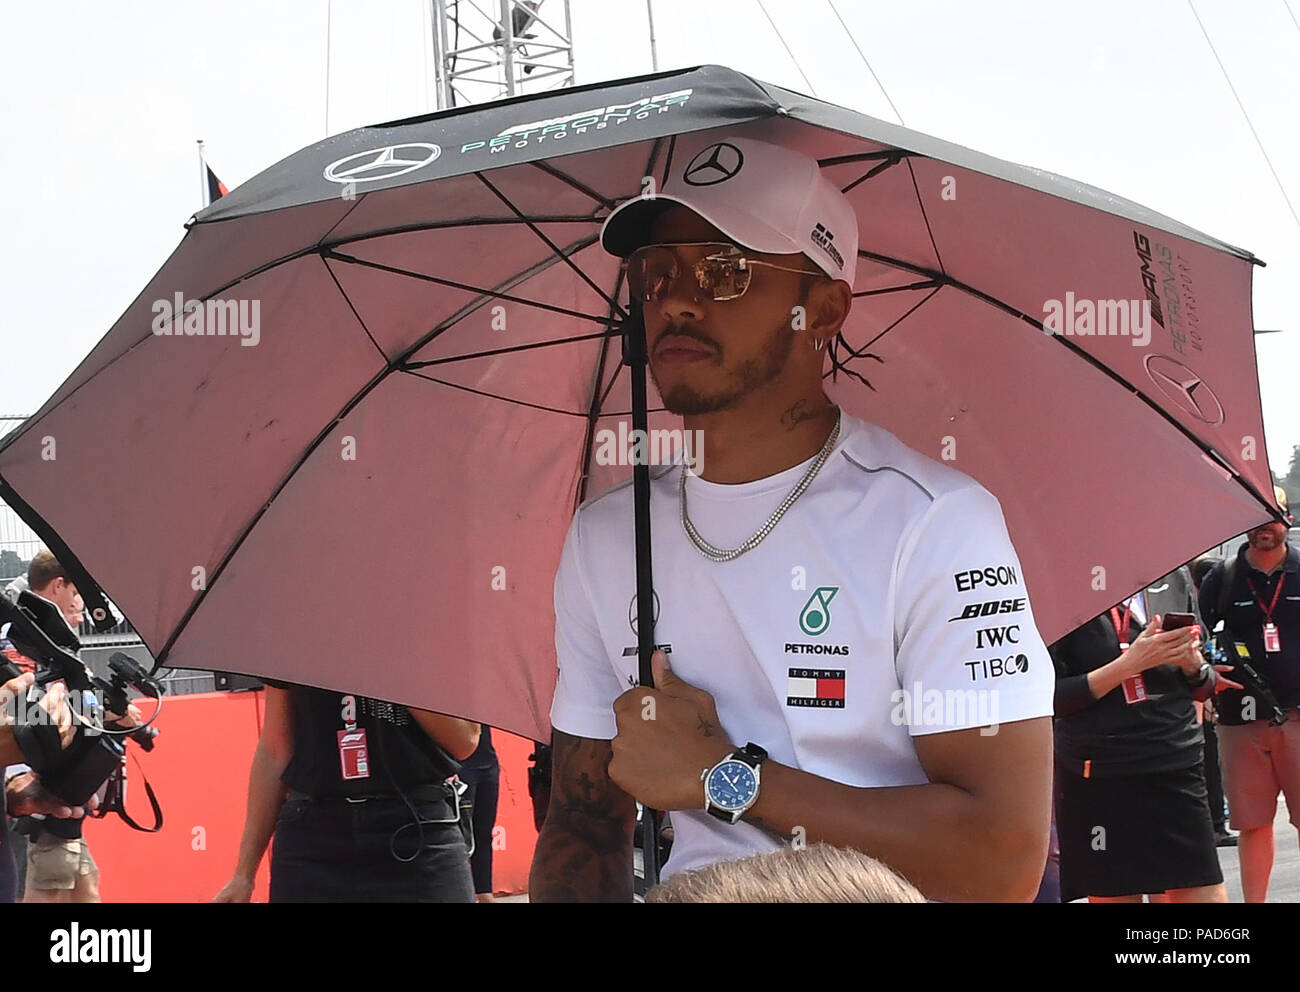 Germany, Hockenheim. 22nd July, 2018. Motorsports, Formula 1 World  Championship, Grand Prix Germany at the Hockenheim Ring, Race: Lewis  Hamilton from Great Britain of the Mercedes AMG Petronas Motor-sport Team,  waits for